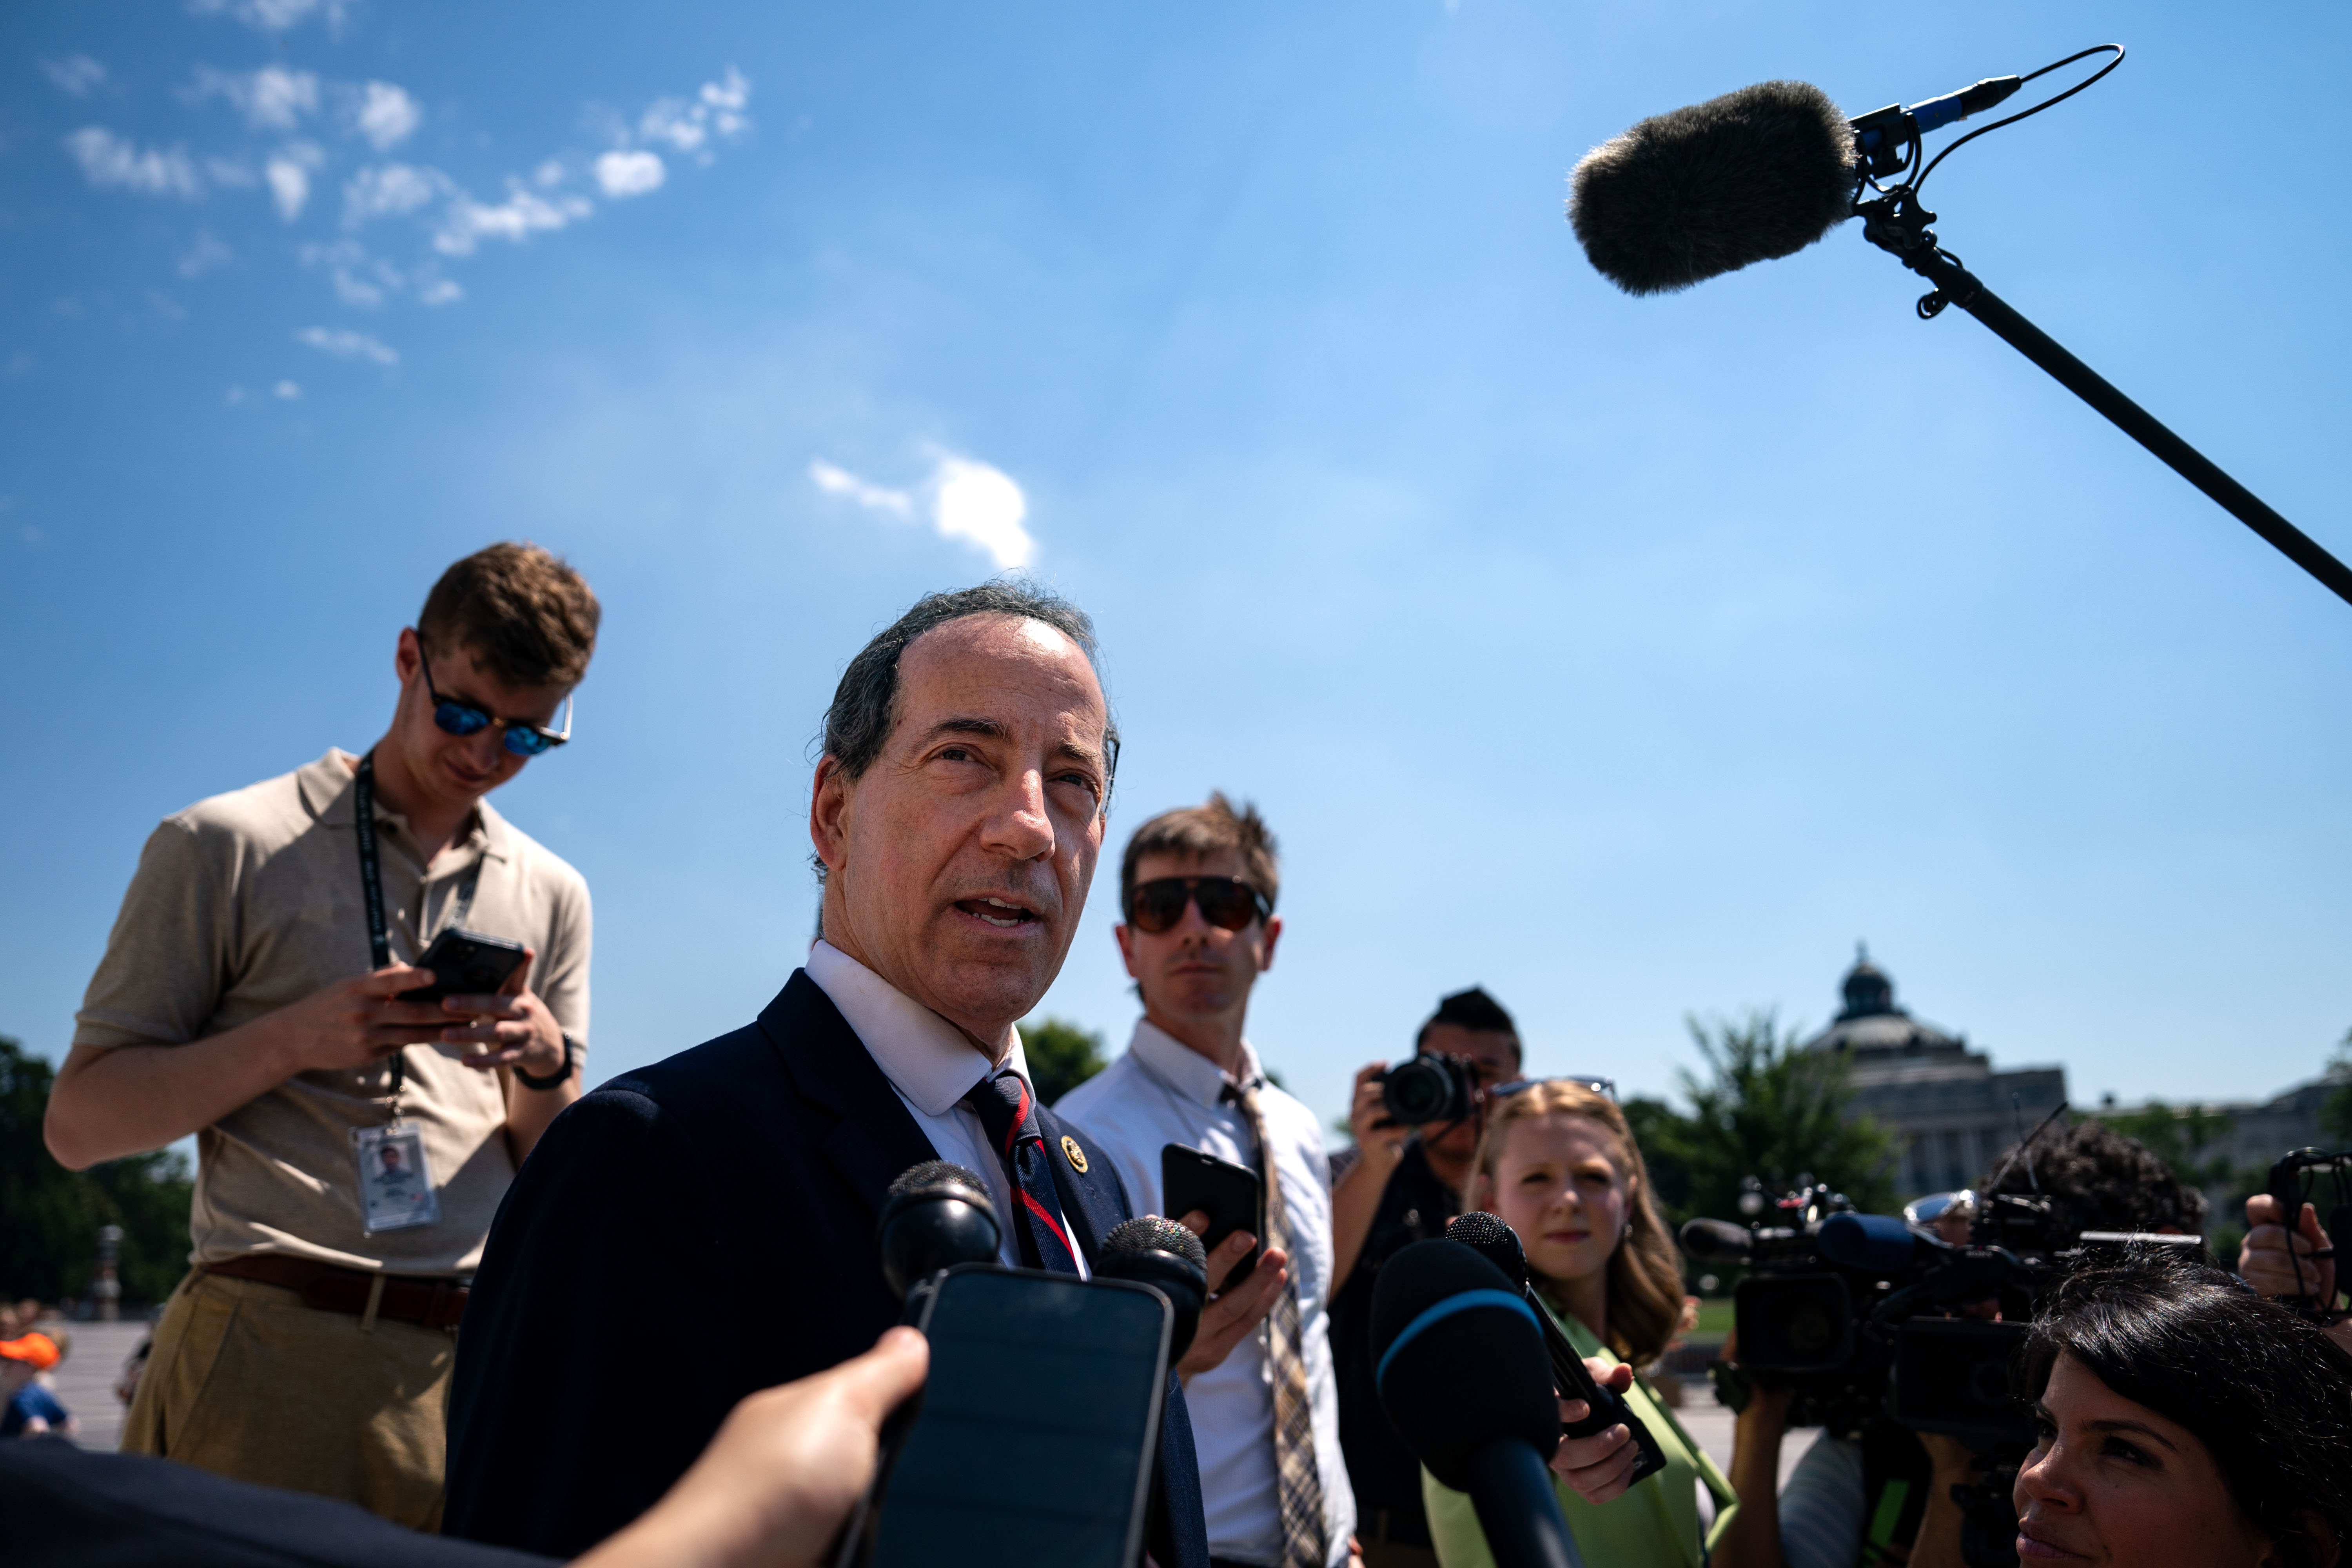 Rep. Jamie Raskin says ‘honest and serious conversations are taking place' about Biden's political future after debate